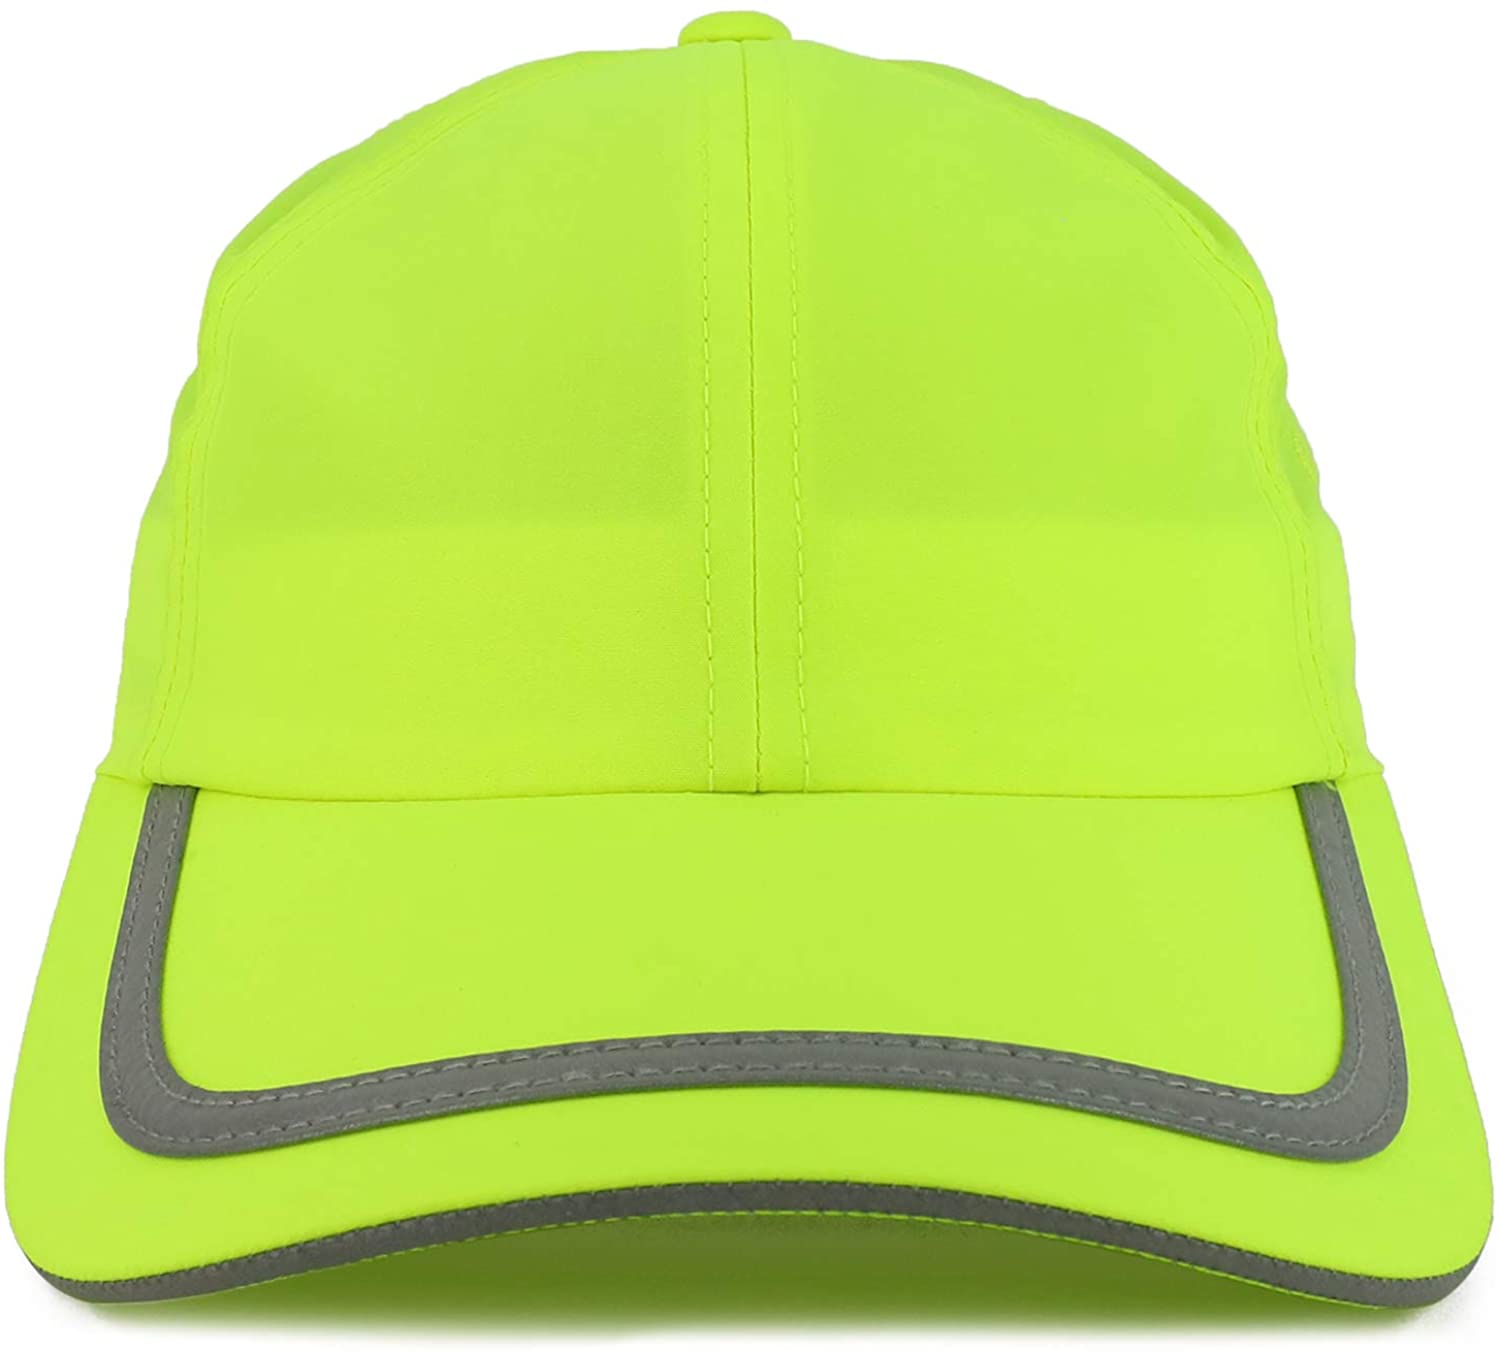 Armycrew Low Profile High Visibility Safety Baseball Cap with Reflective Taping - Yellow